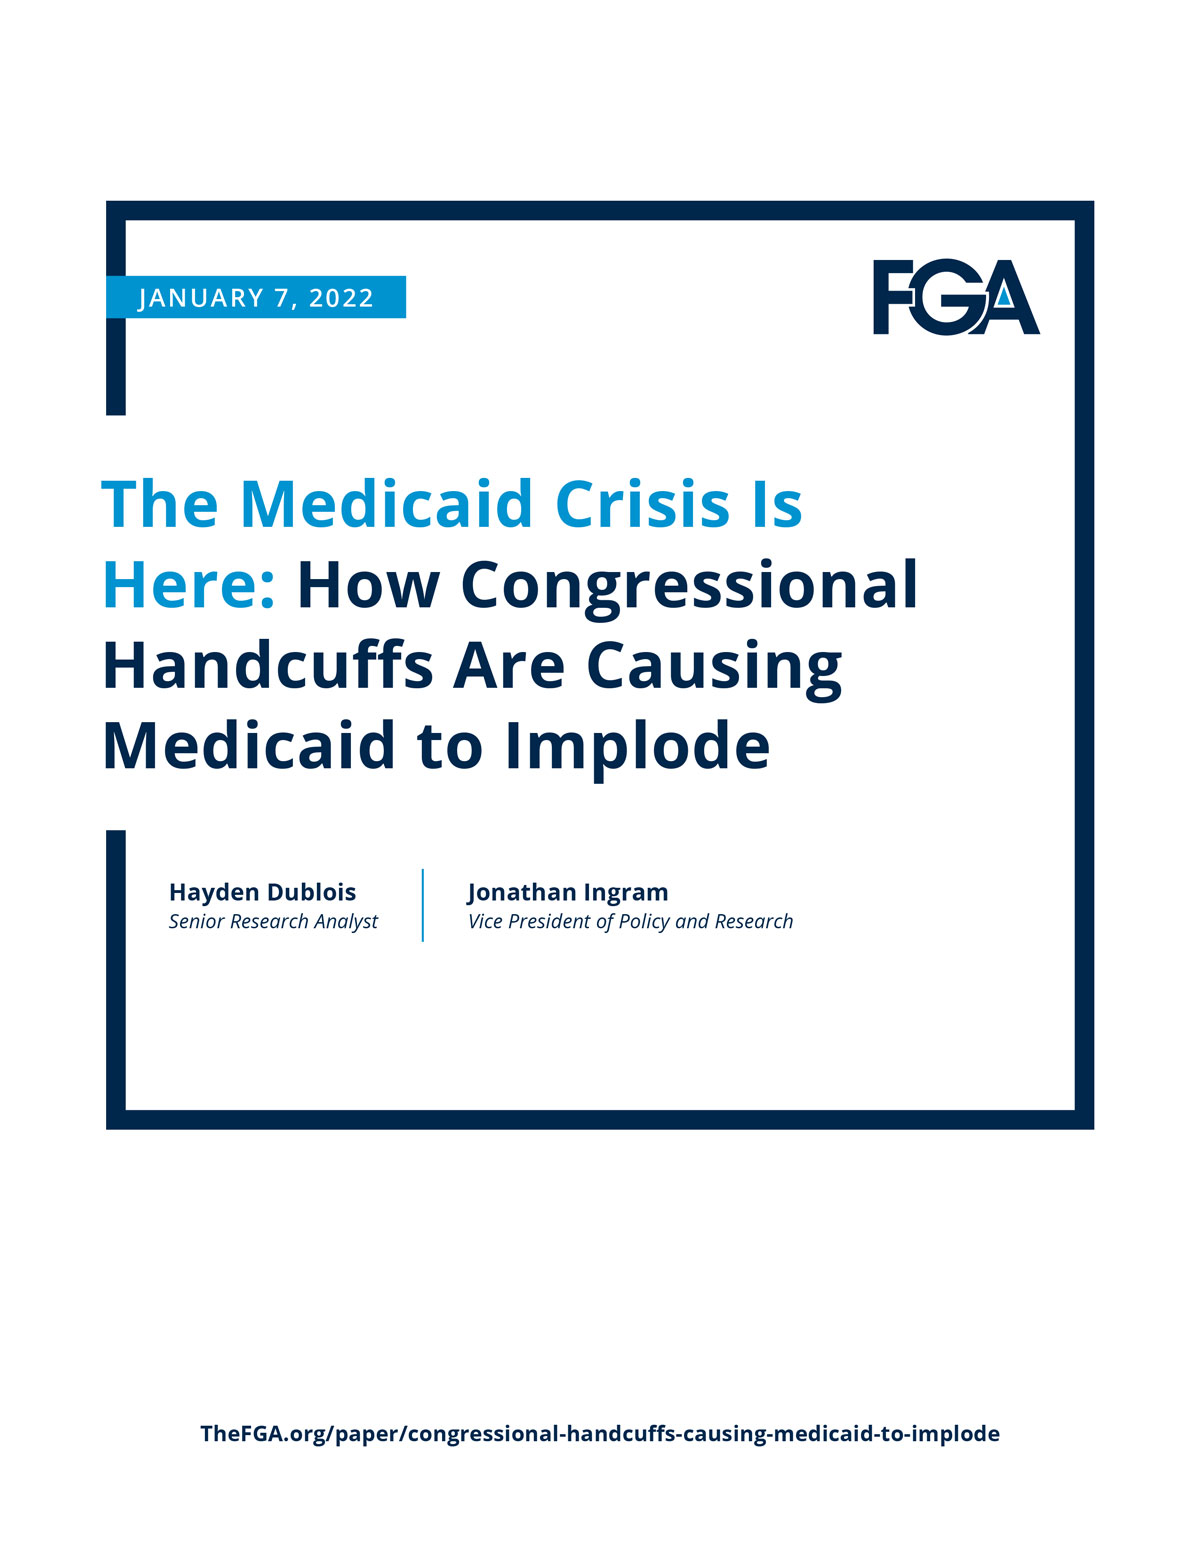 The Medicaid Crisis Is Here: How Congressional Handcuffs Are Causing Medicaid to Implode